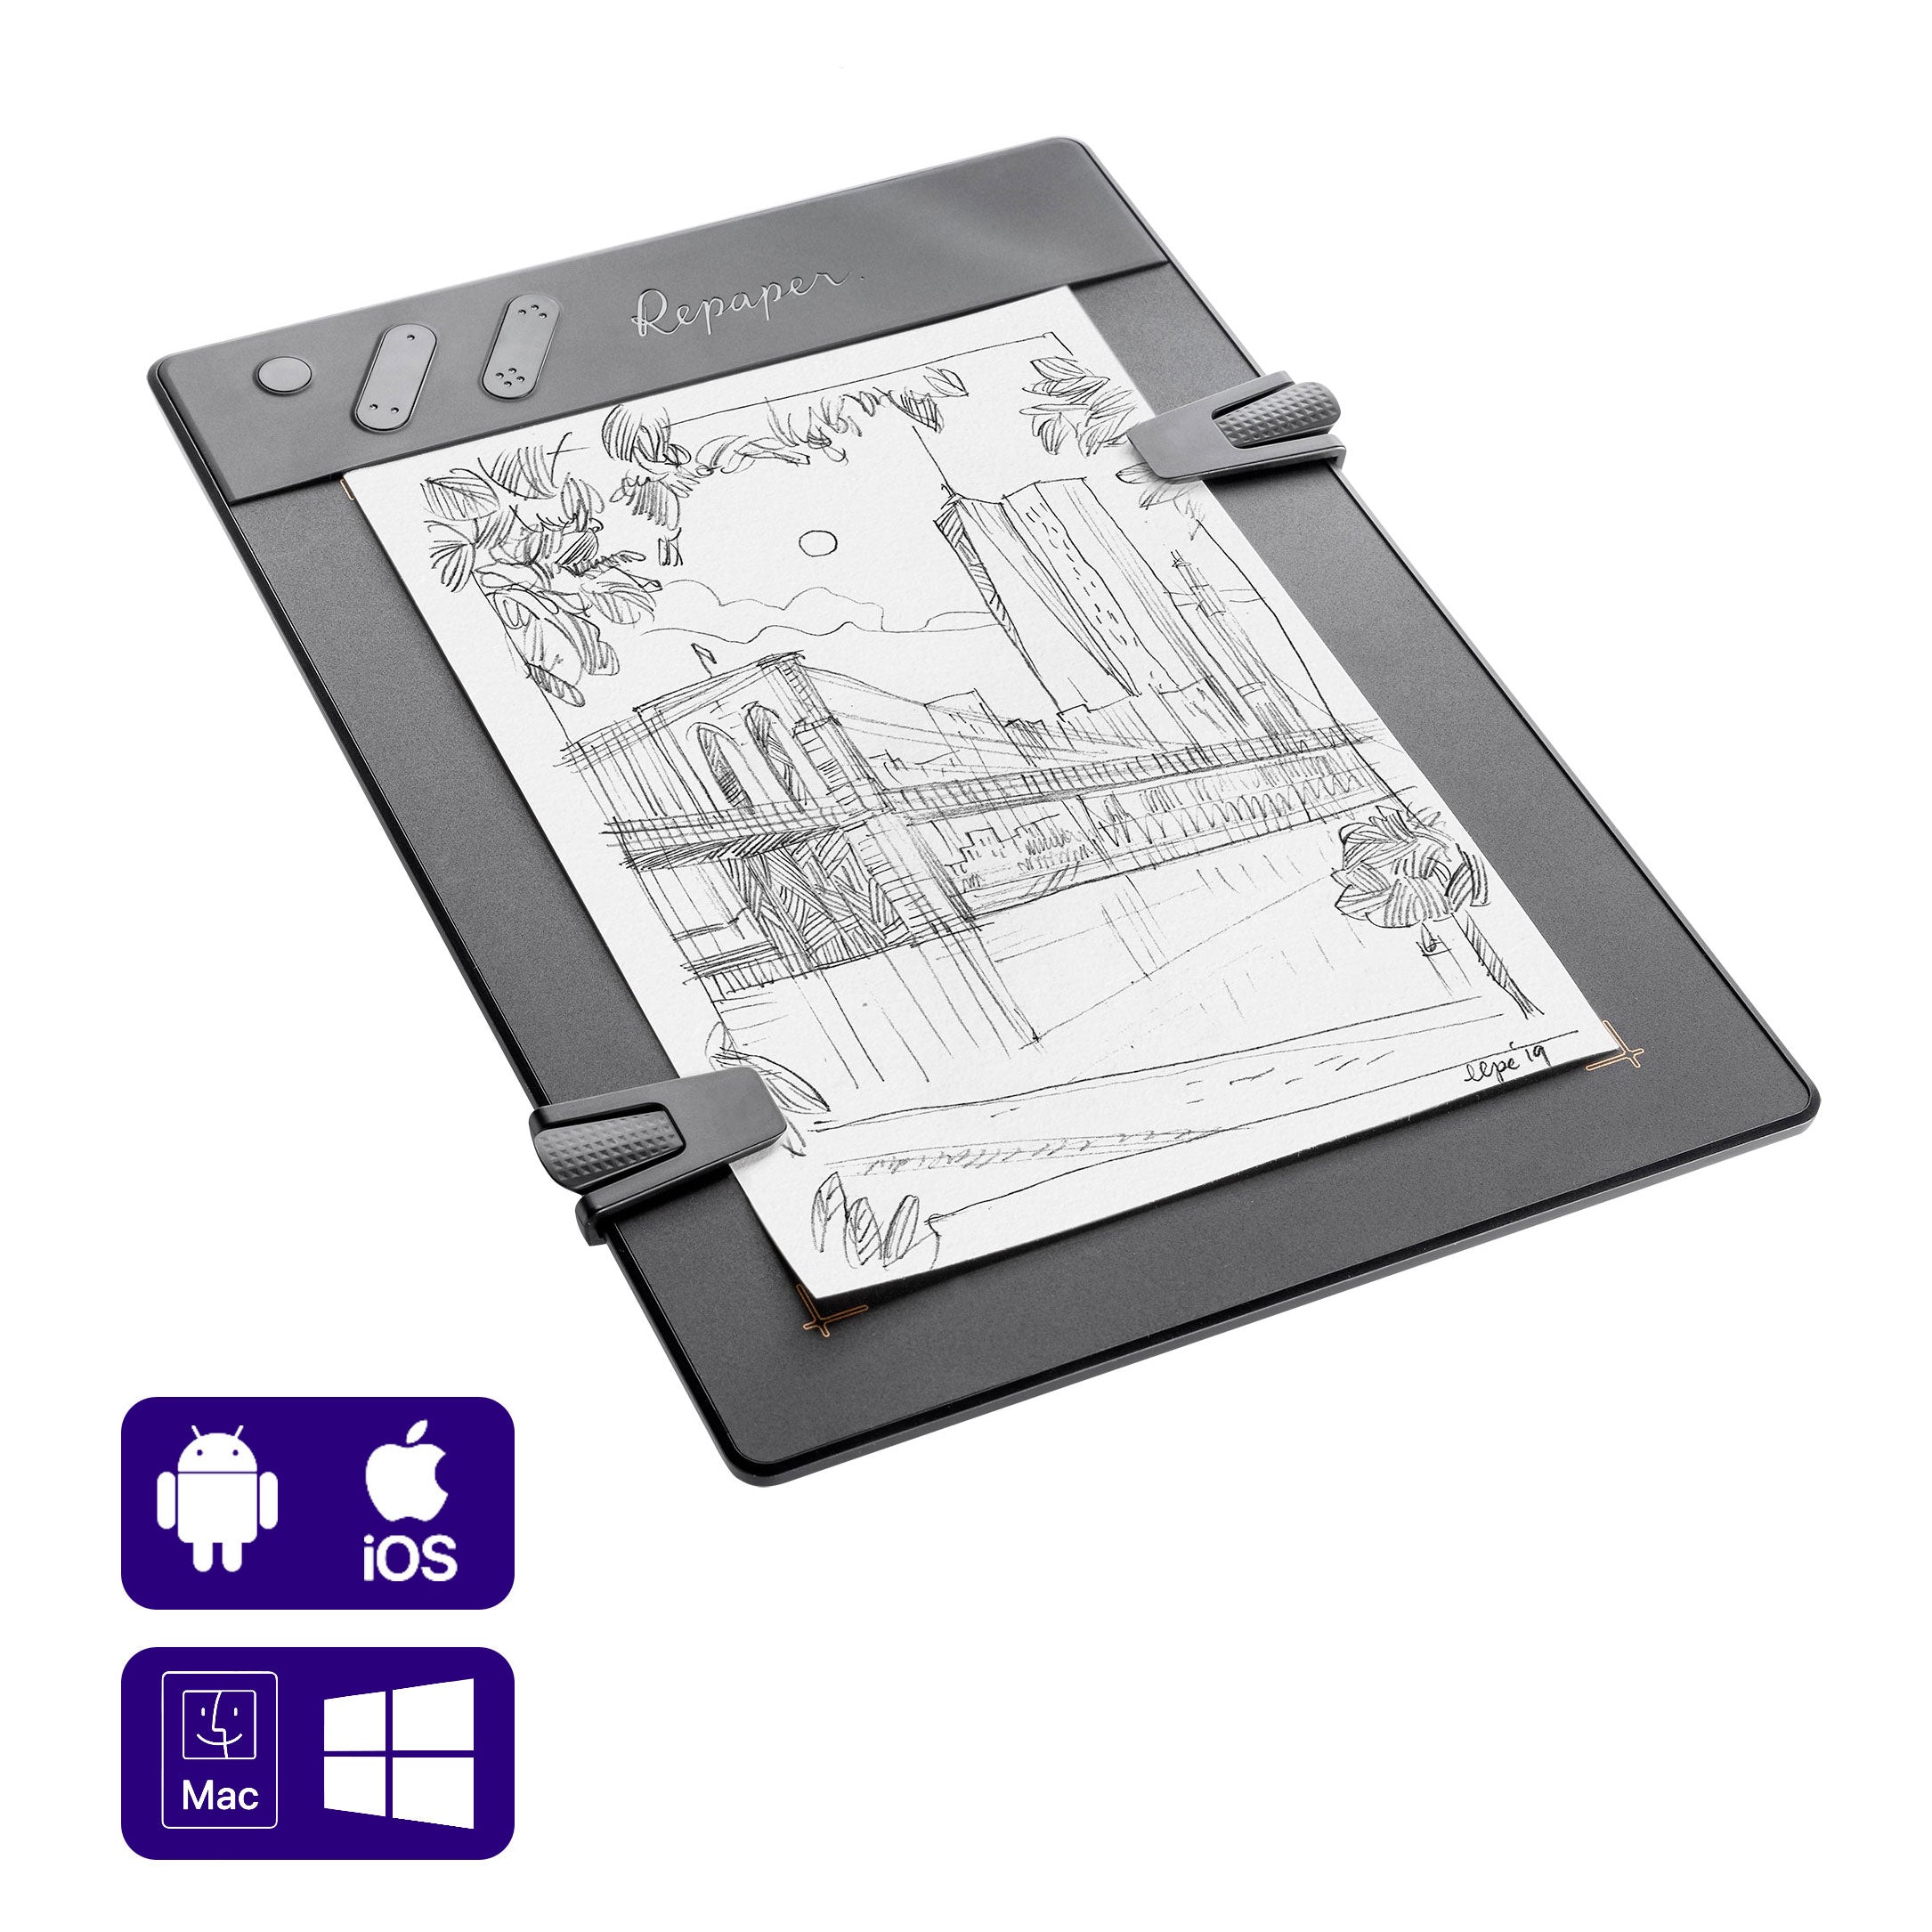 Iskn+The+Slate+2+Pencil+%26+Paper+Graphic+Tablet for sale online